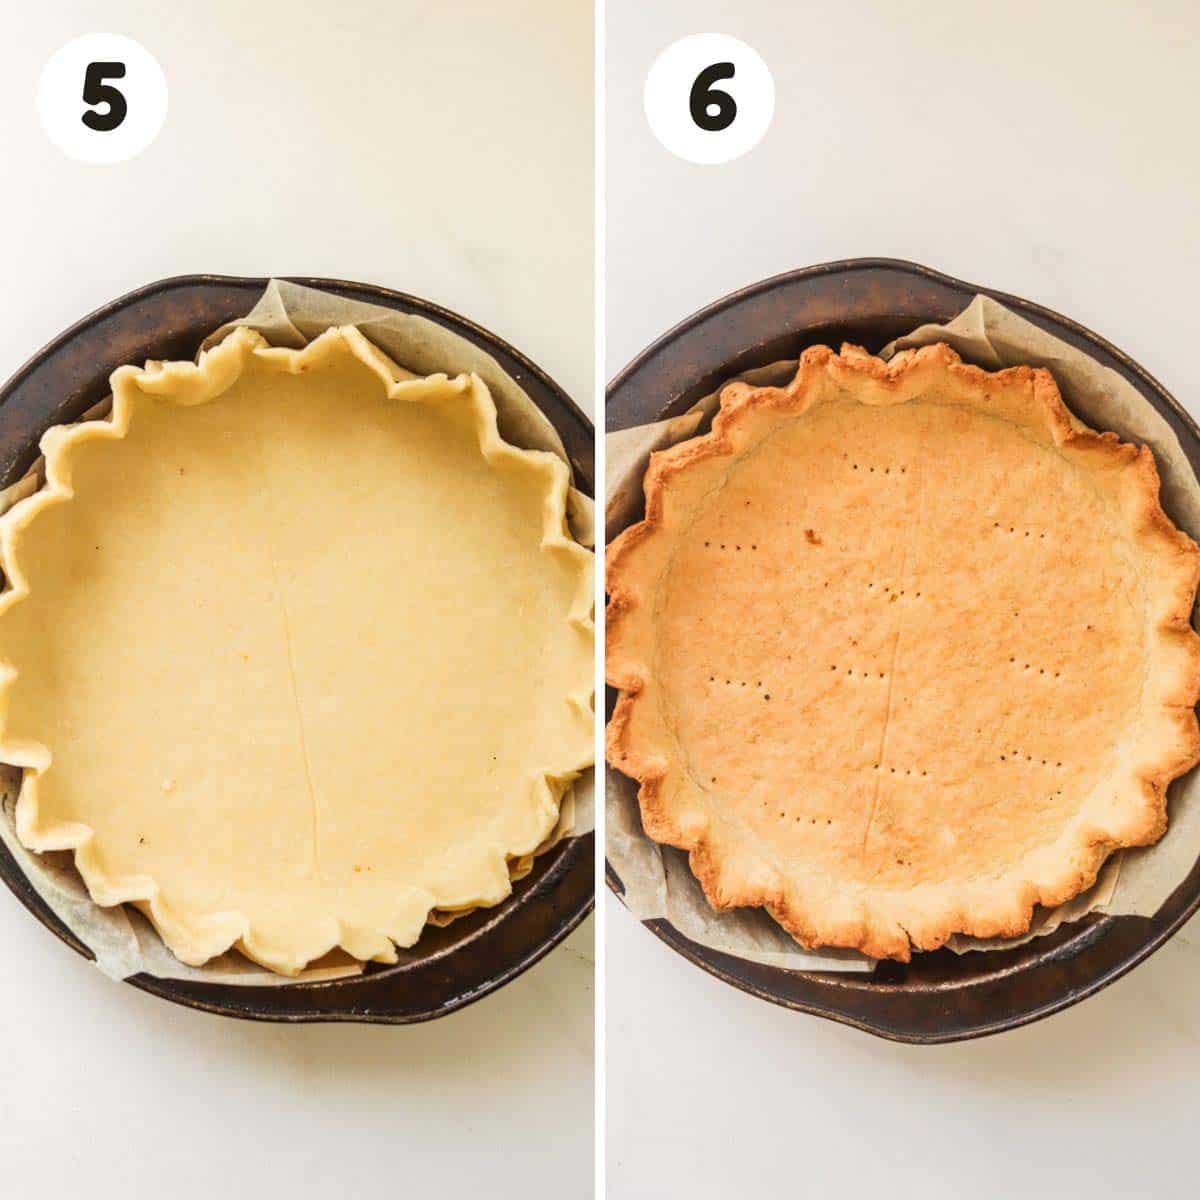 Steps to bake the pie crust.